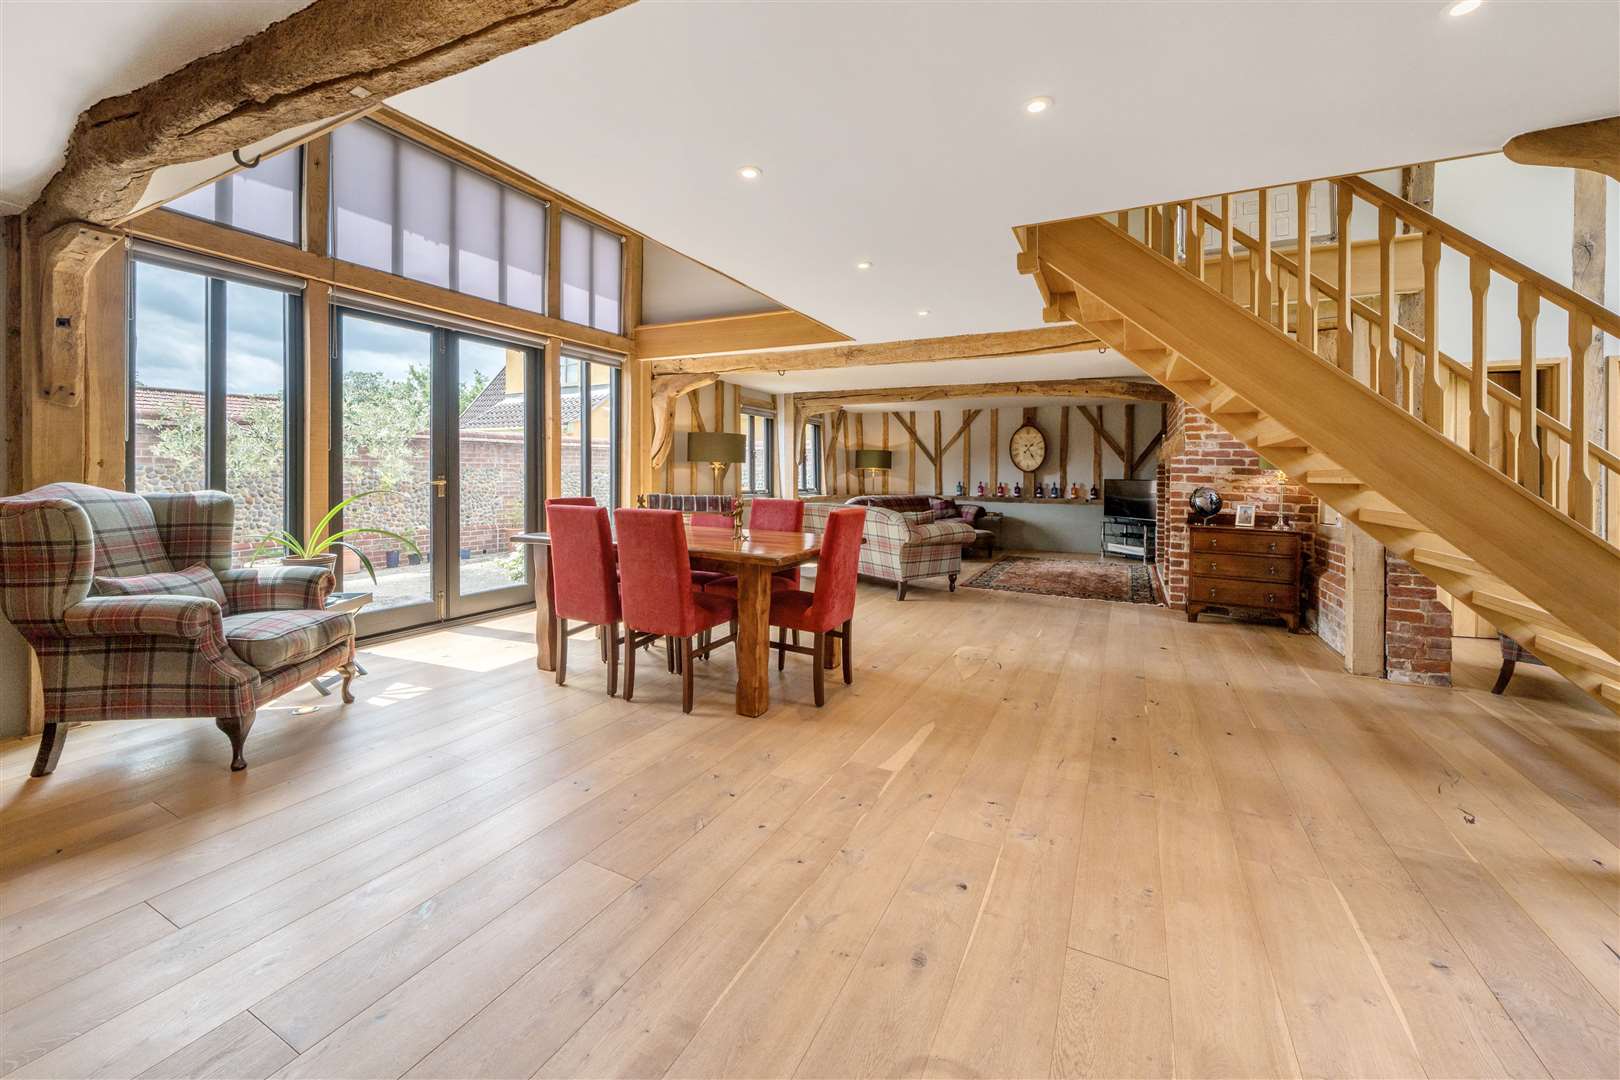 The first floor is reached via a solid oak staircase